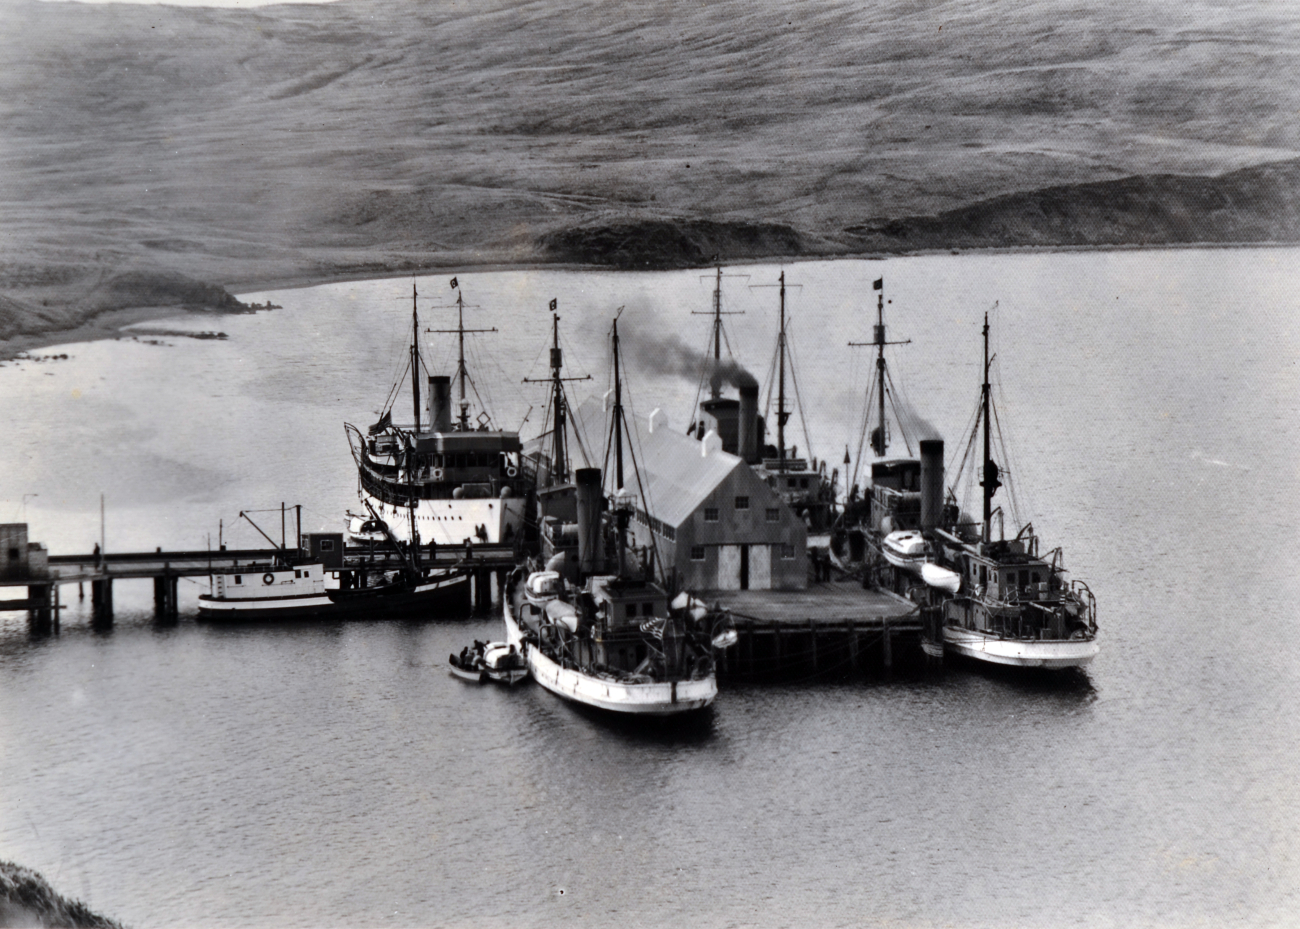 Coast and Geodetic Survey Ships SURVEYOR, PIONEER,DISCOVERER, and GUIDE at Dutch Harbor